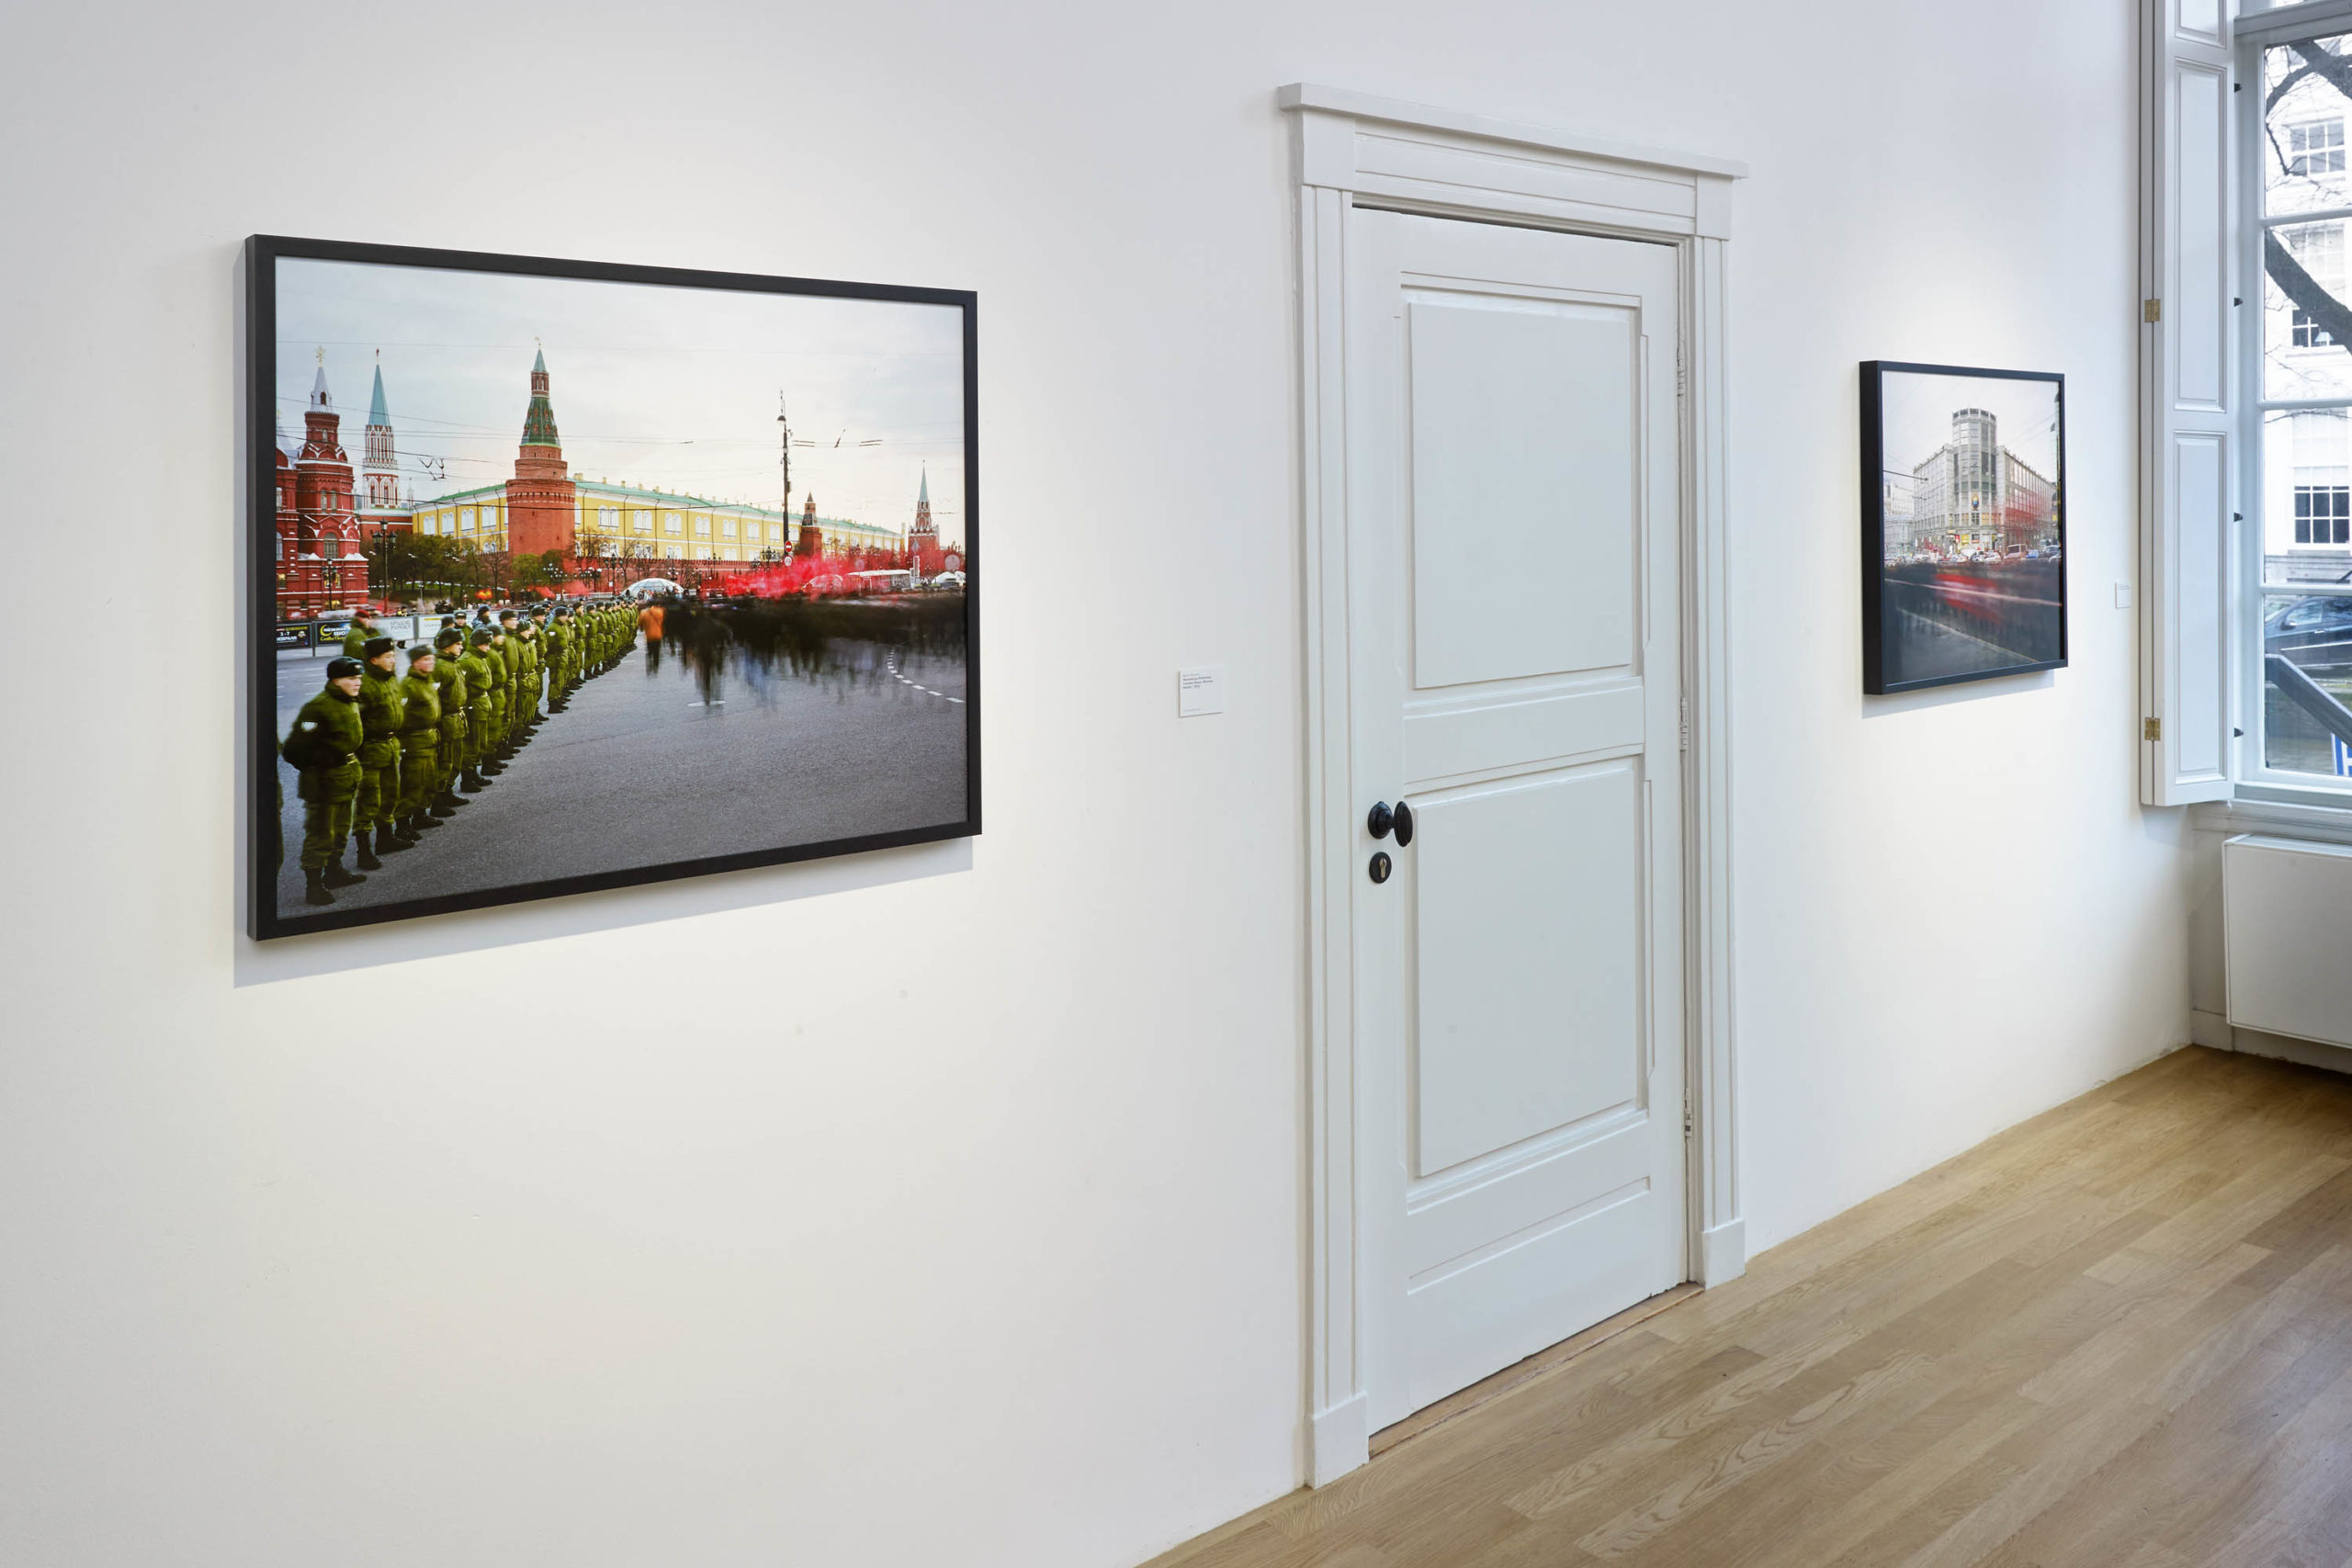 Huis Marseille – Museum for Photography, Amsterdam